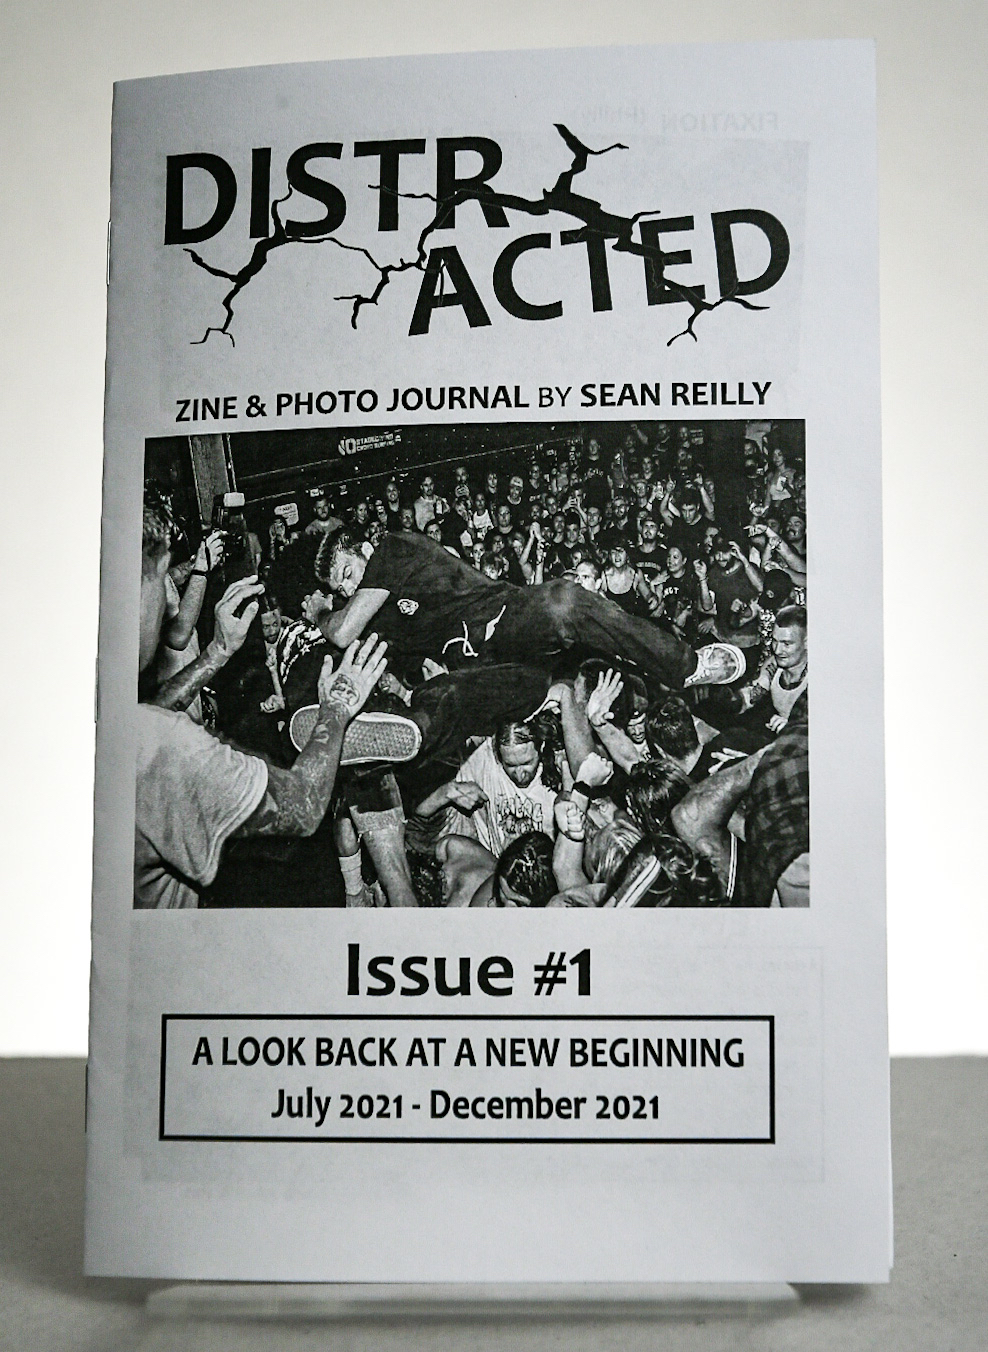 Distracted - Issue #1 Zine